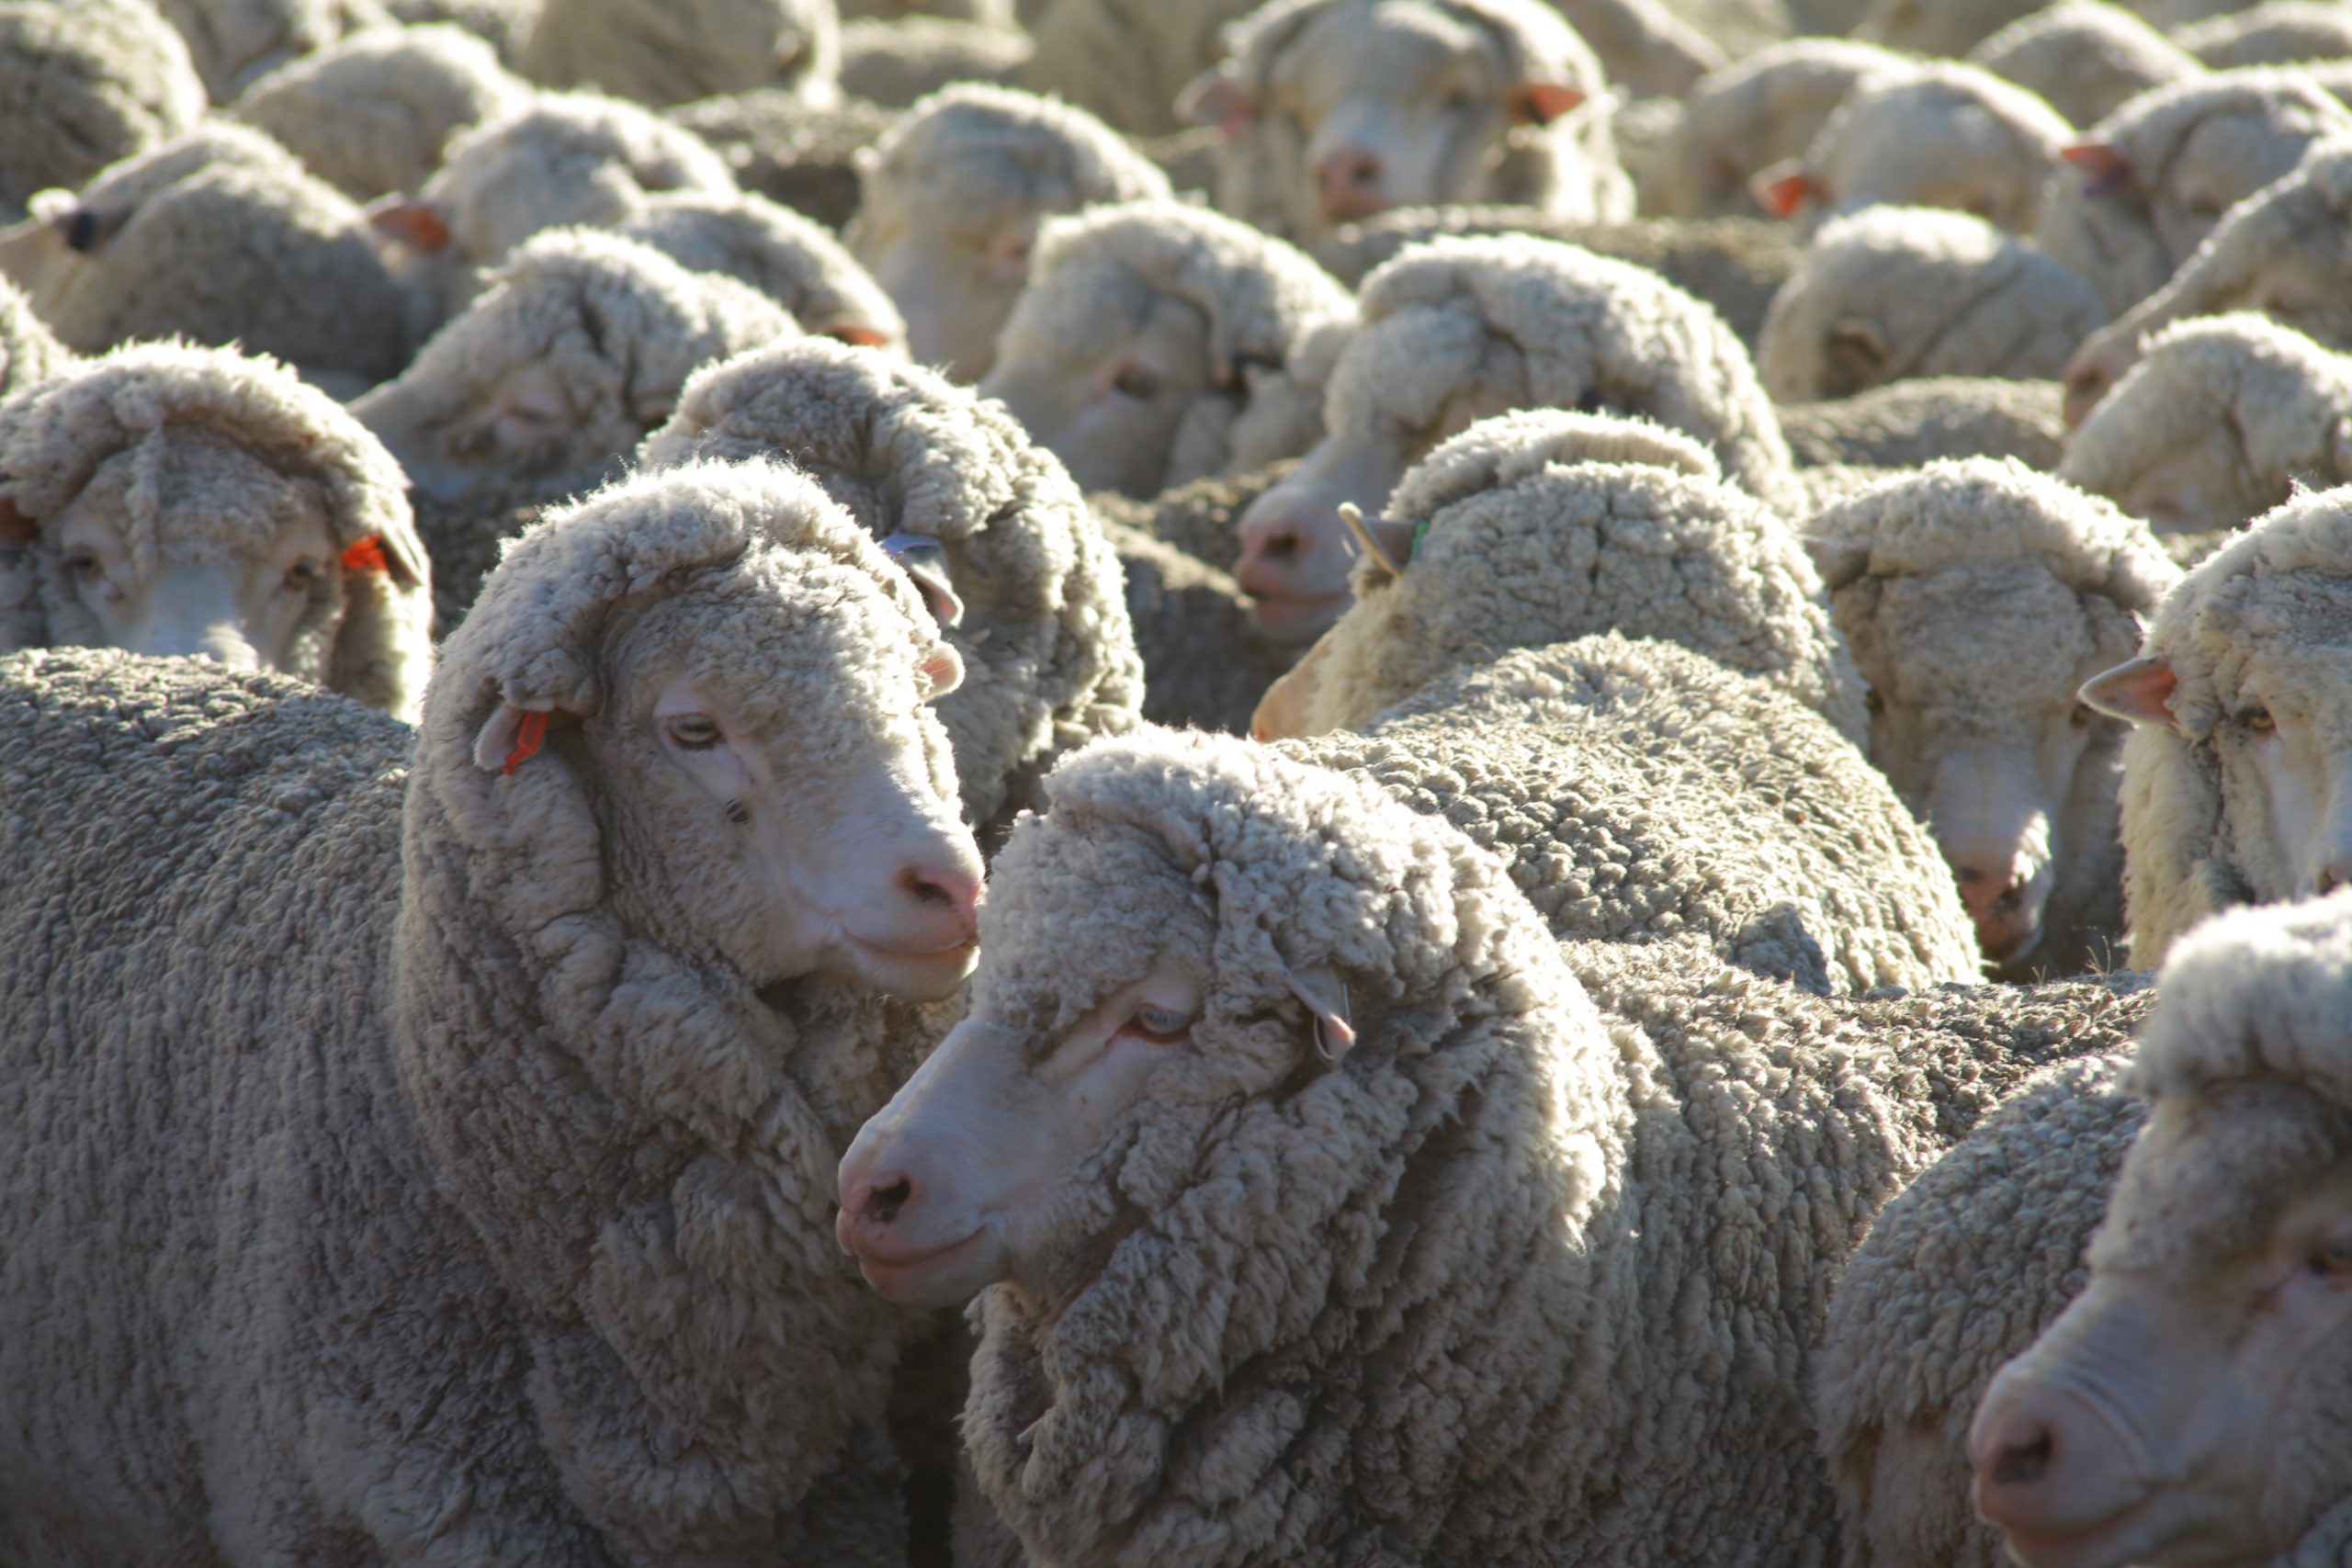 Decline Predicted for Australia’s Shorn Wool Production